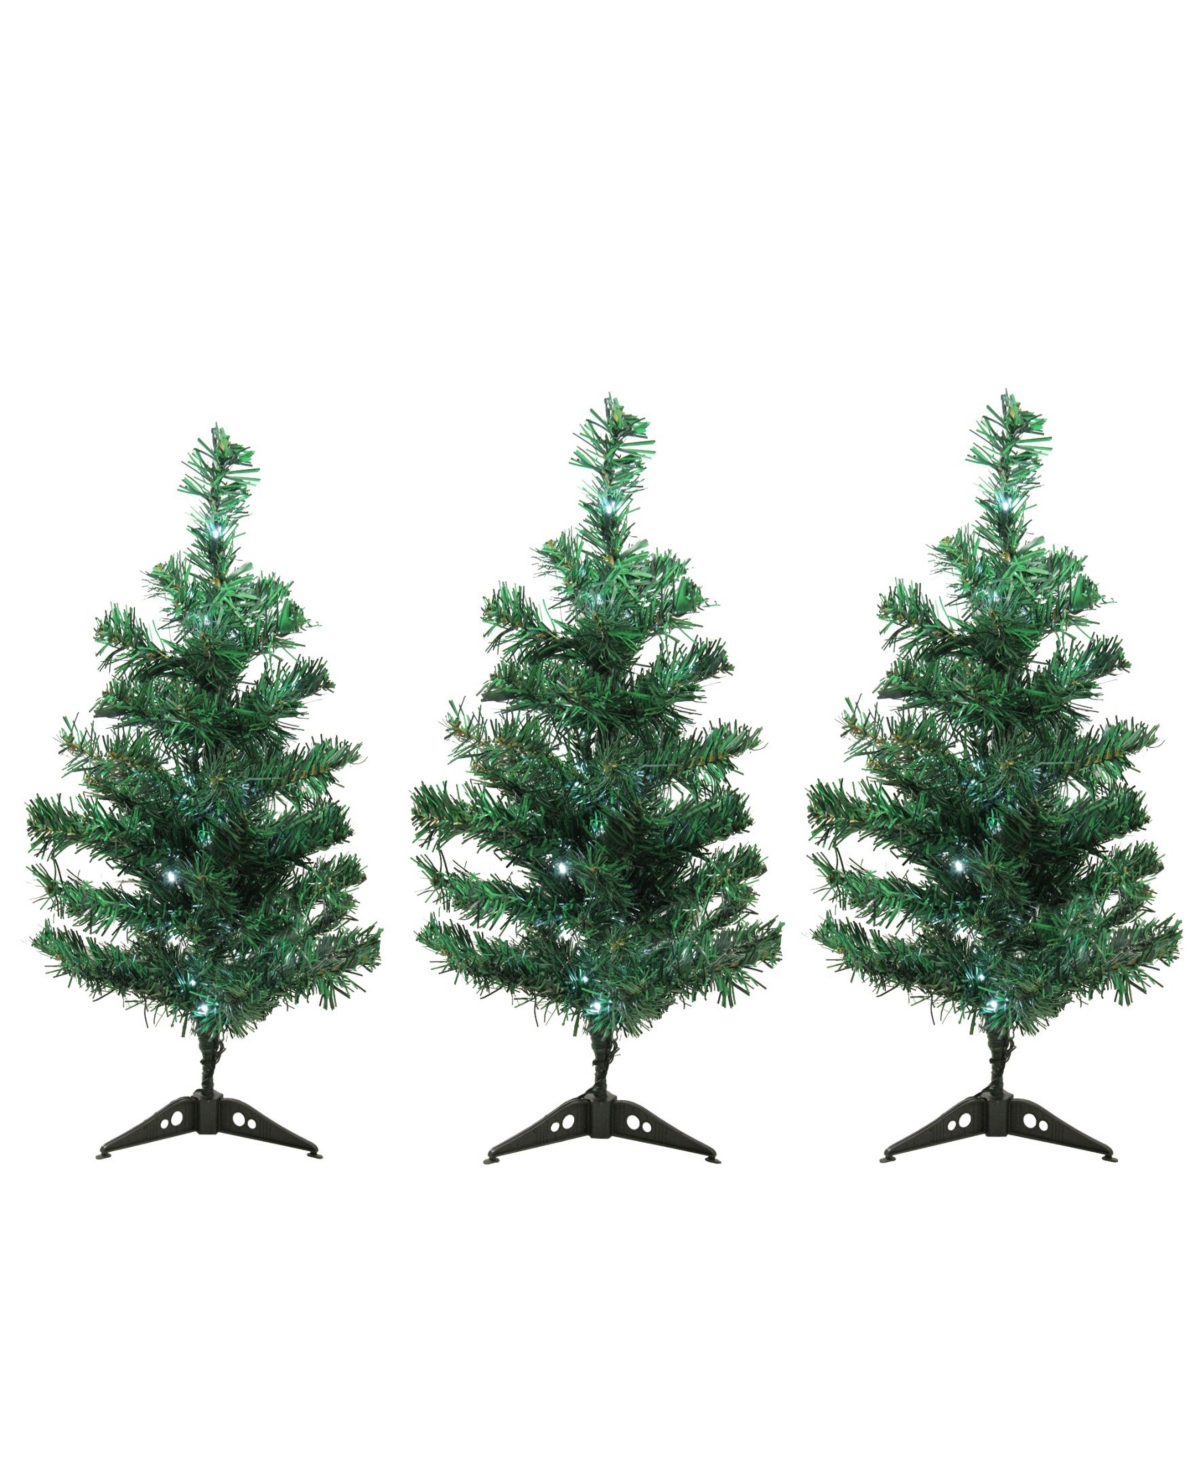 Set of 3 Led Lighted Christmas Tree Driveway or Pathway Markers Outdoor Decorations - Green